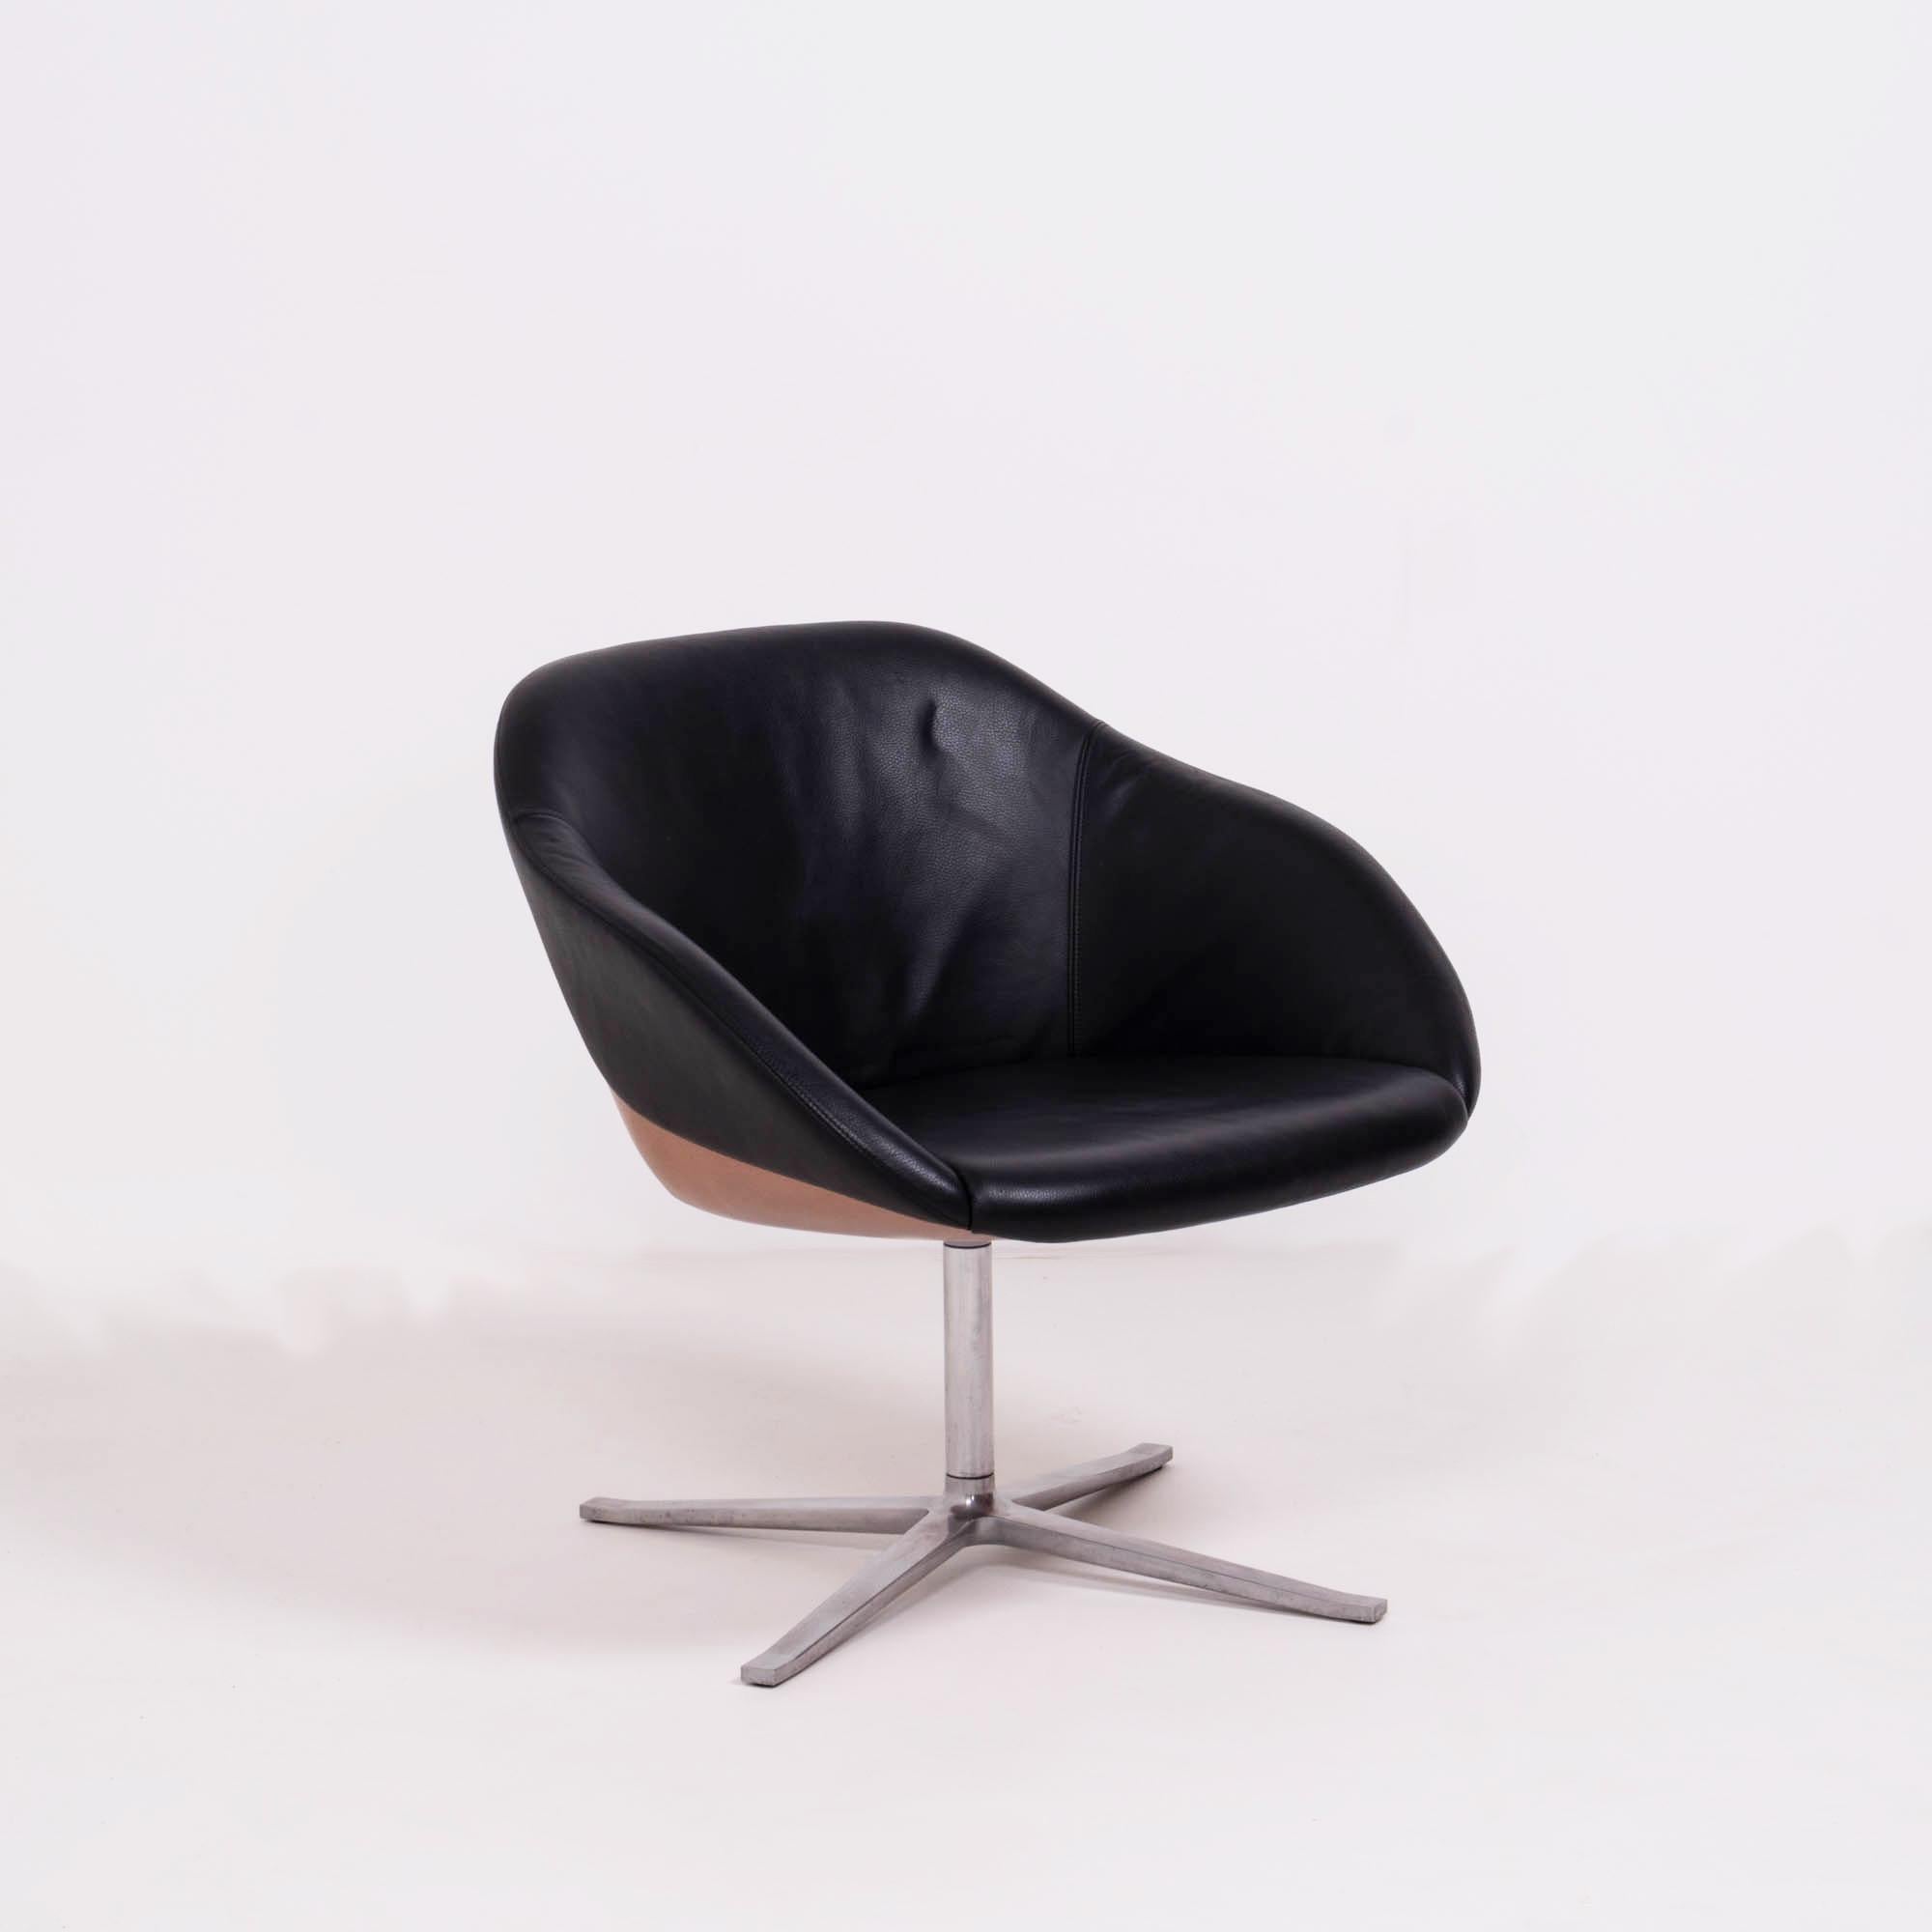 Late 20th Century Knoll Mid-Century Modern Turtle Swivel Lounge Chair in Black Leather